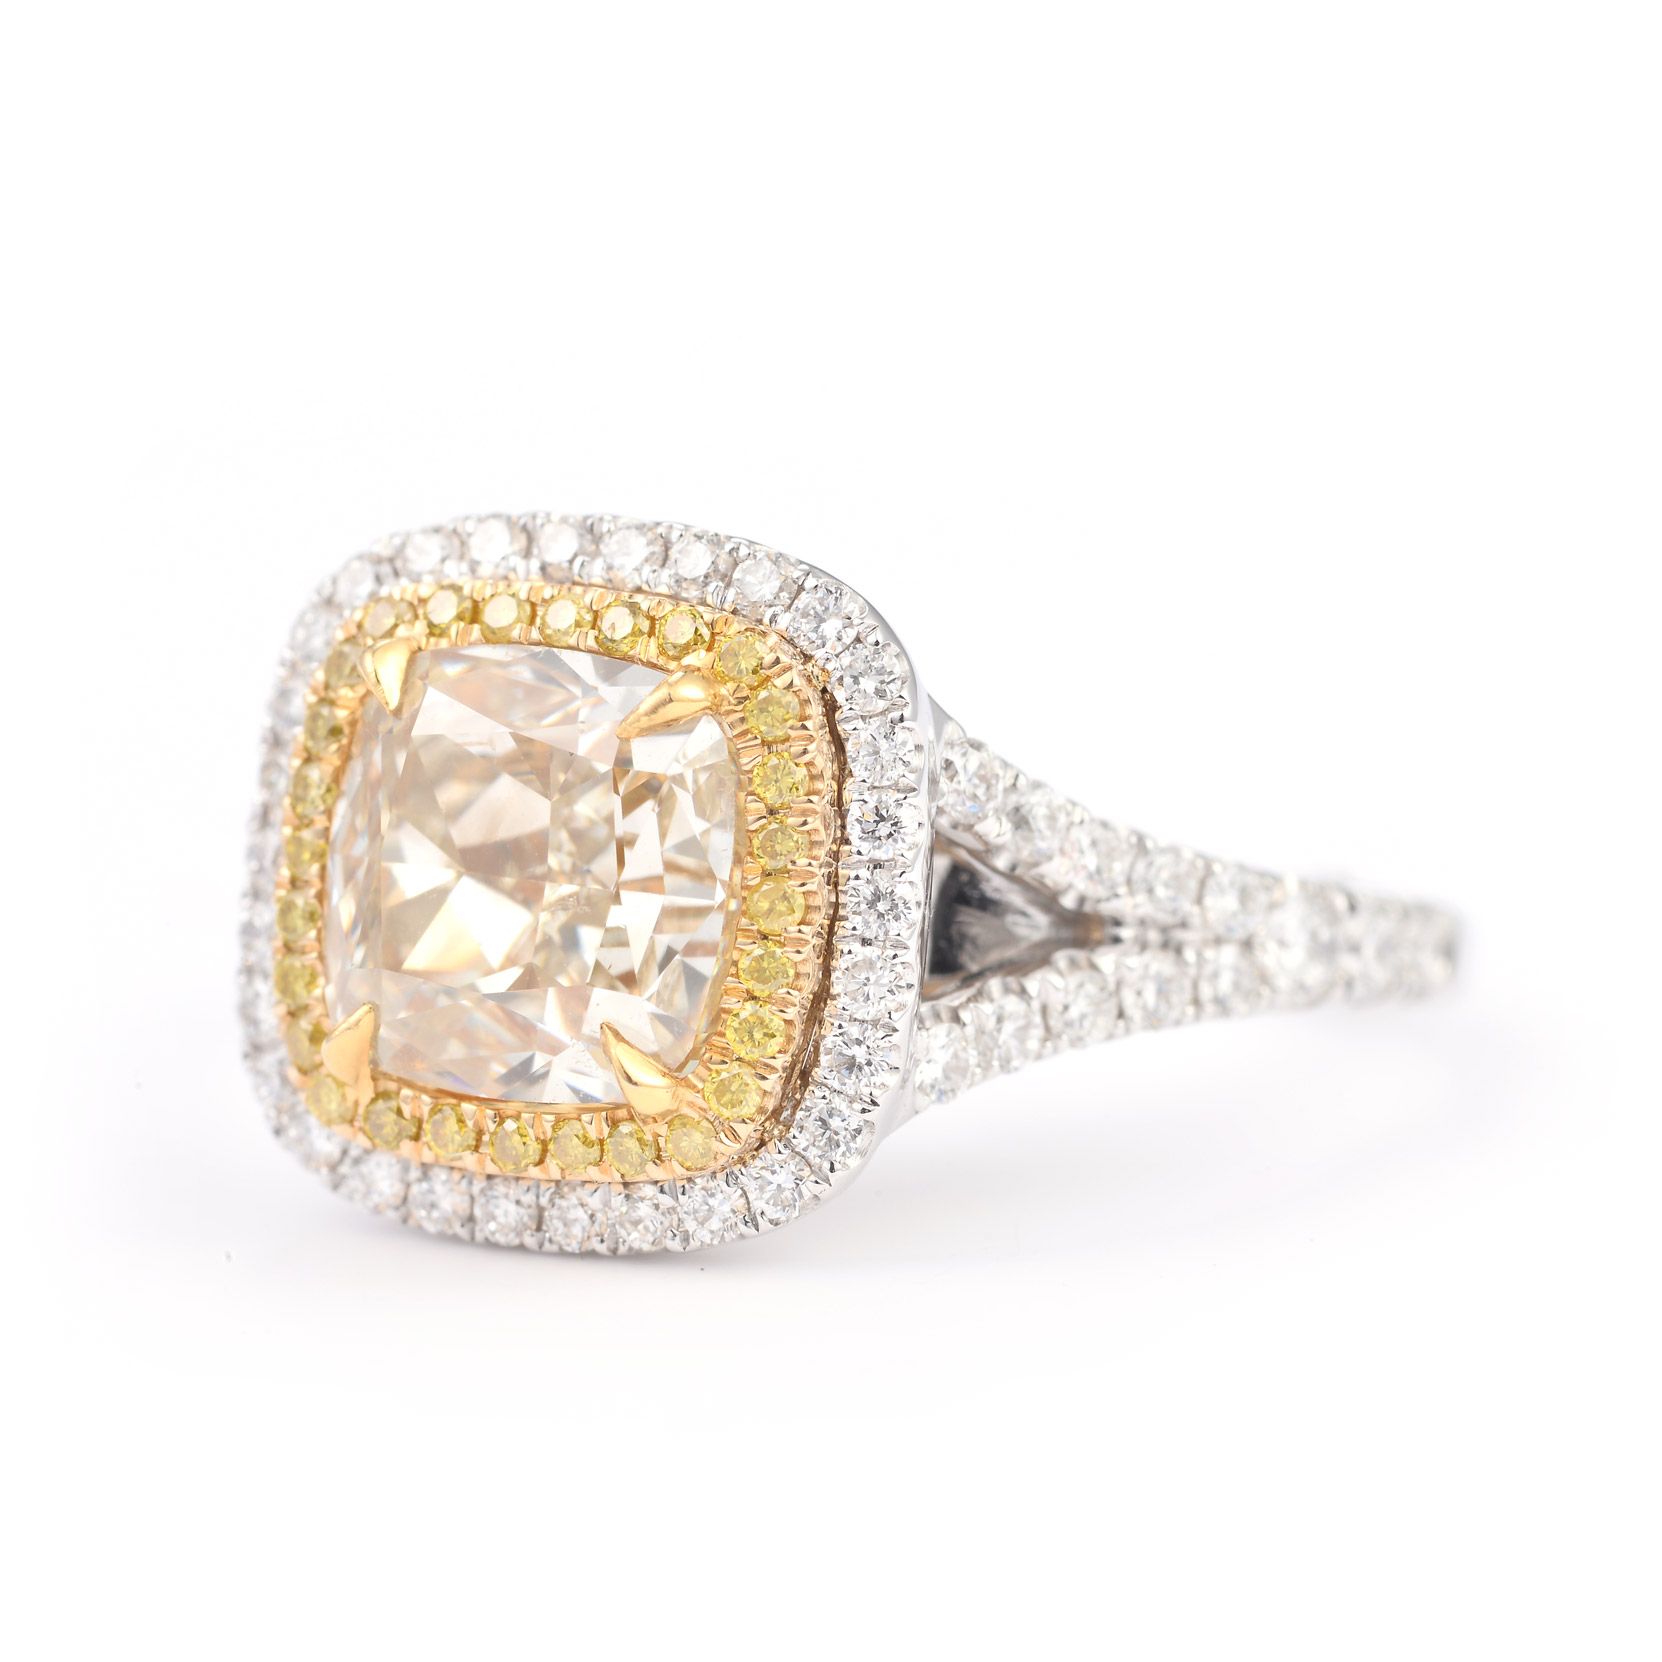 Fancy Yellow Diamond Ring, 0.54 Ct. (1.00 Ct. TW), Radiant shape, CGTC Certified, 10170723990